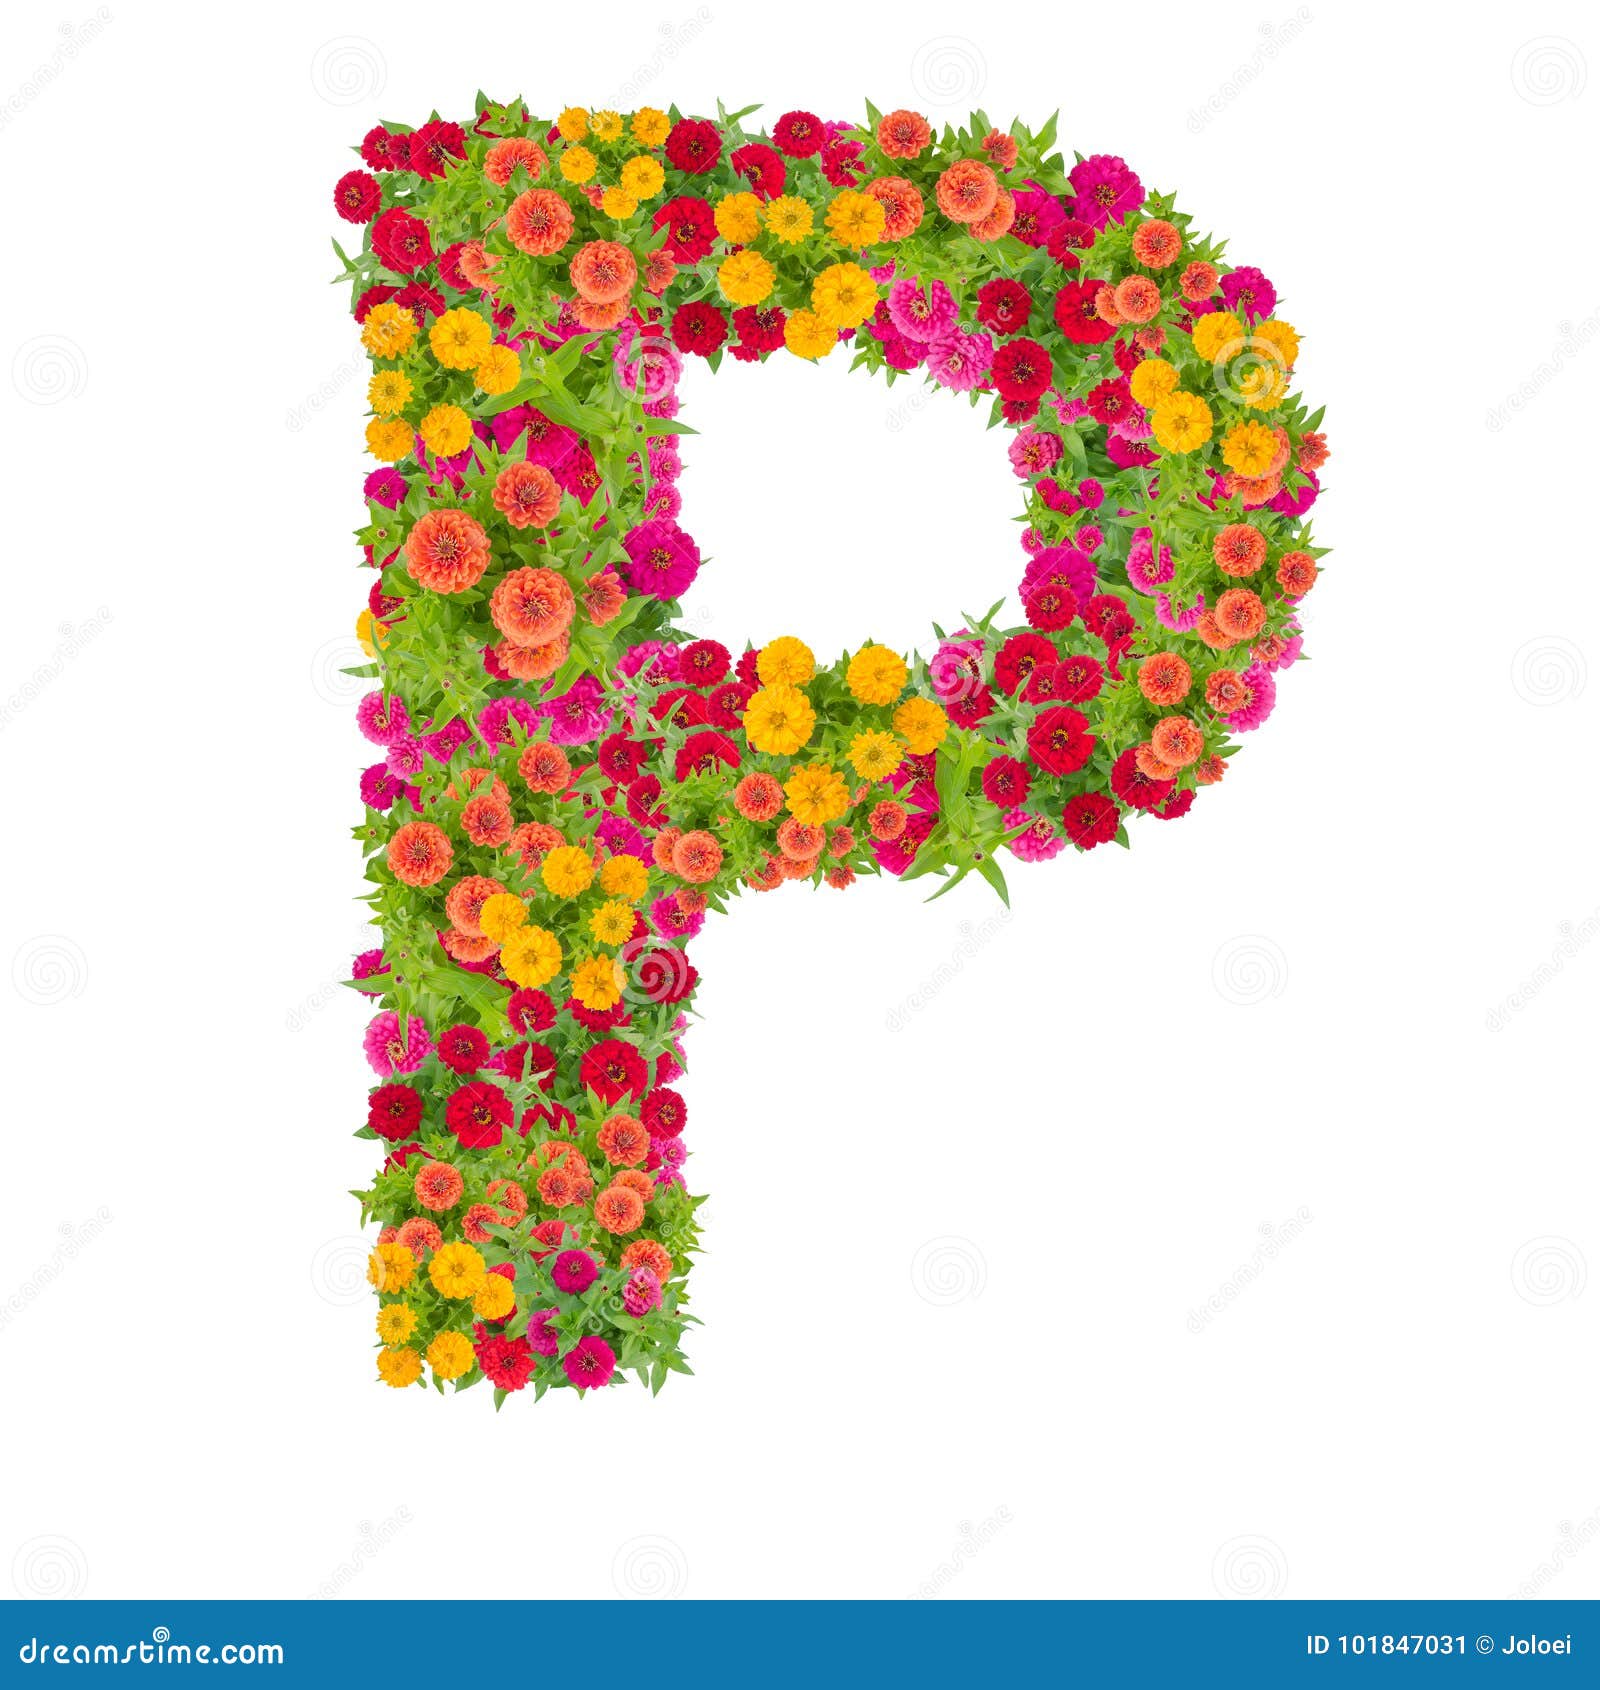 Letter P Alphabet Made from Zinnia Flower Stock Image - Image of ...